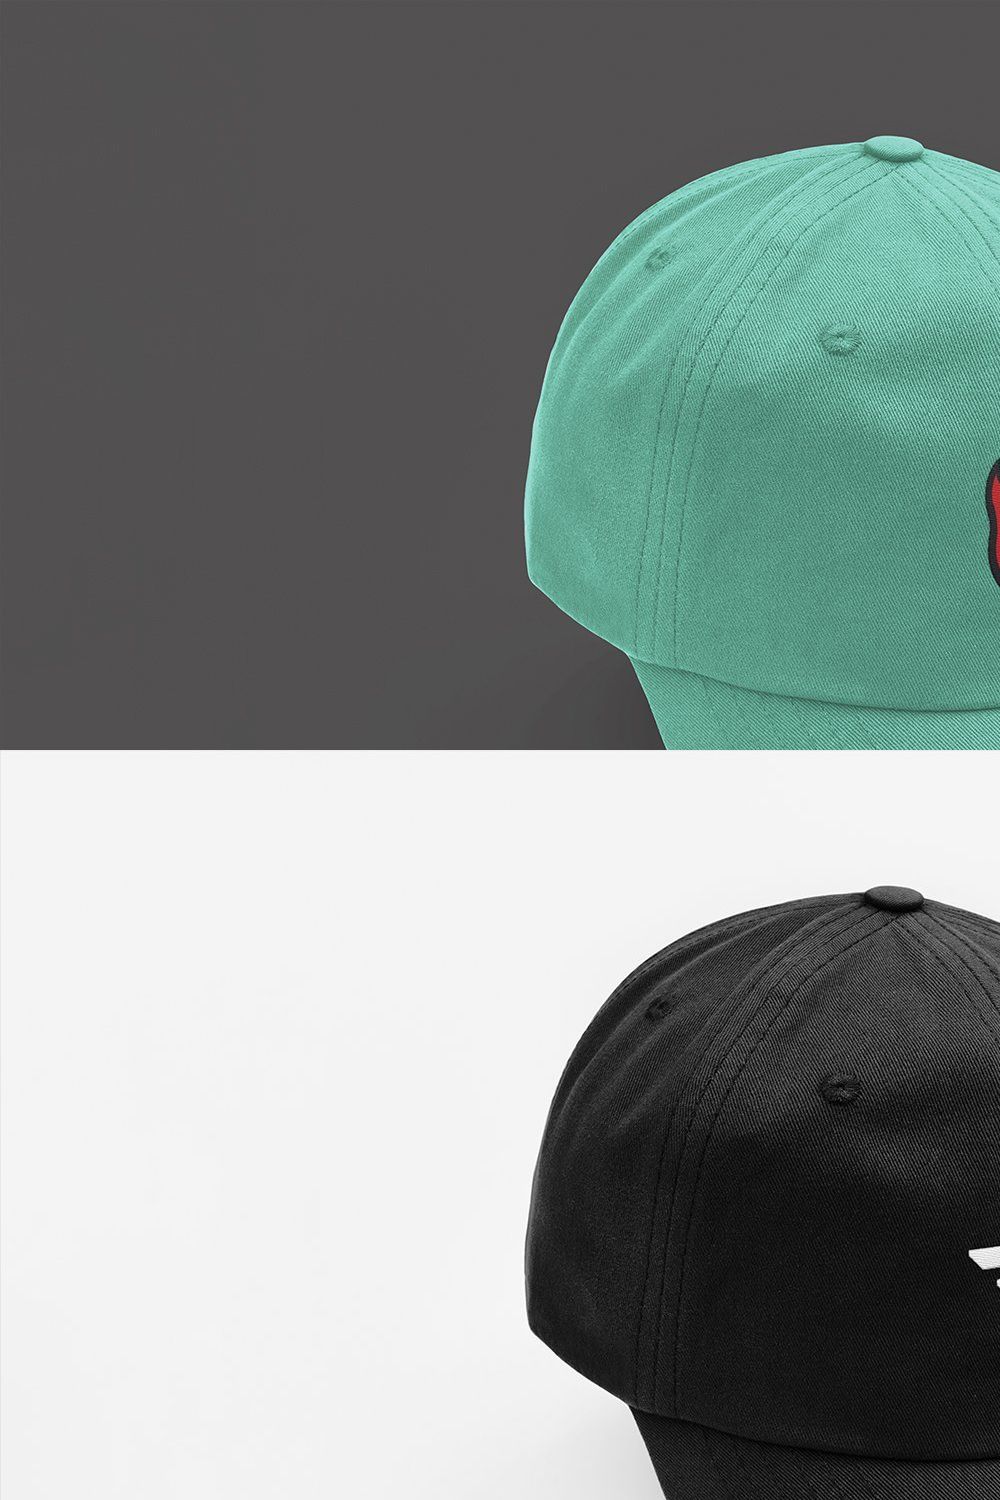 Realistic Polo Caps Mockup 2 pinterest preview image.